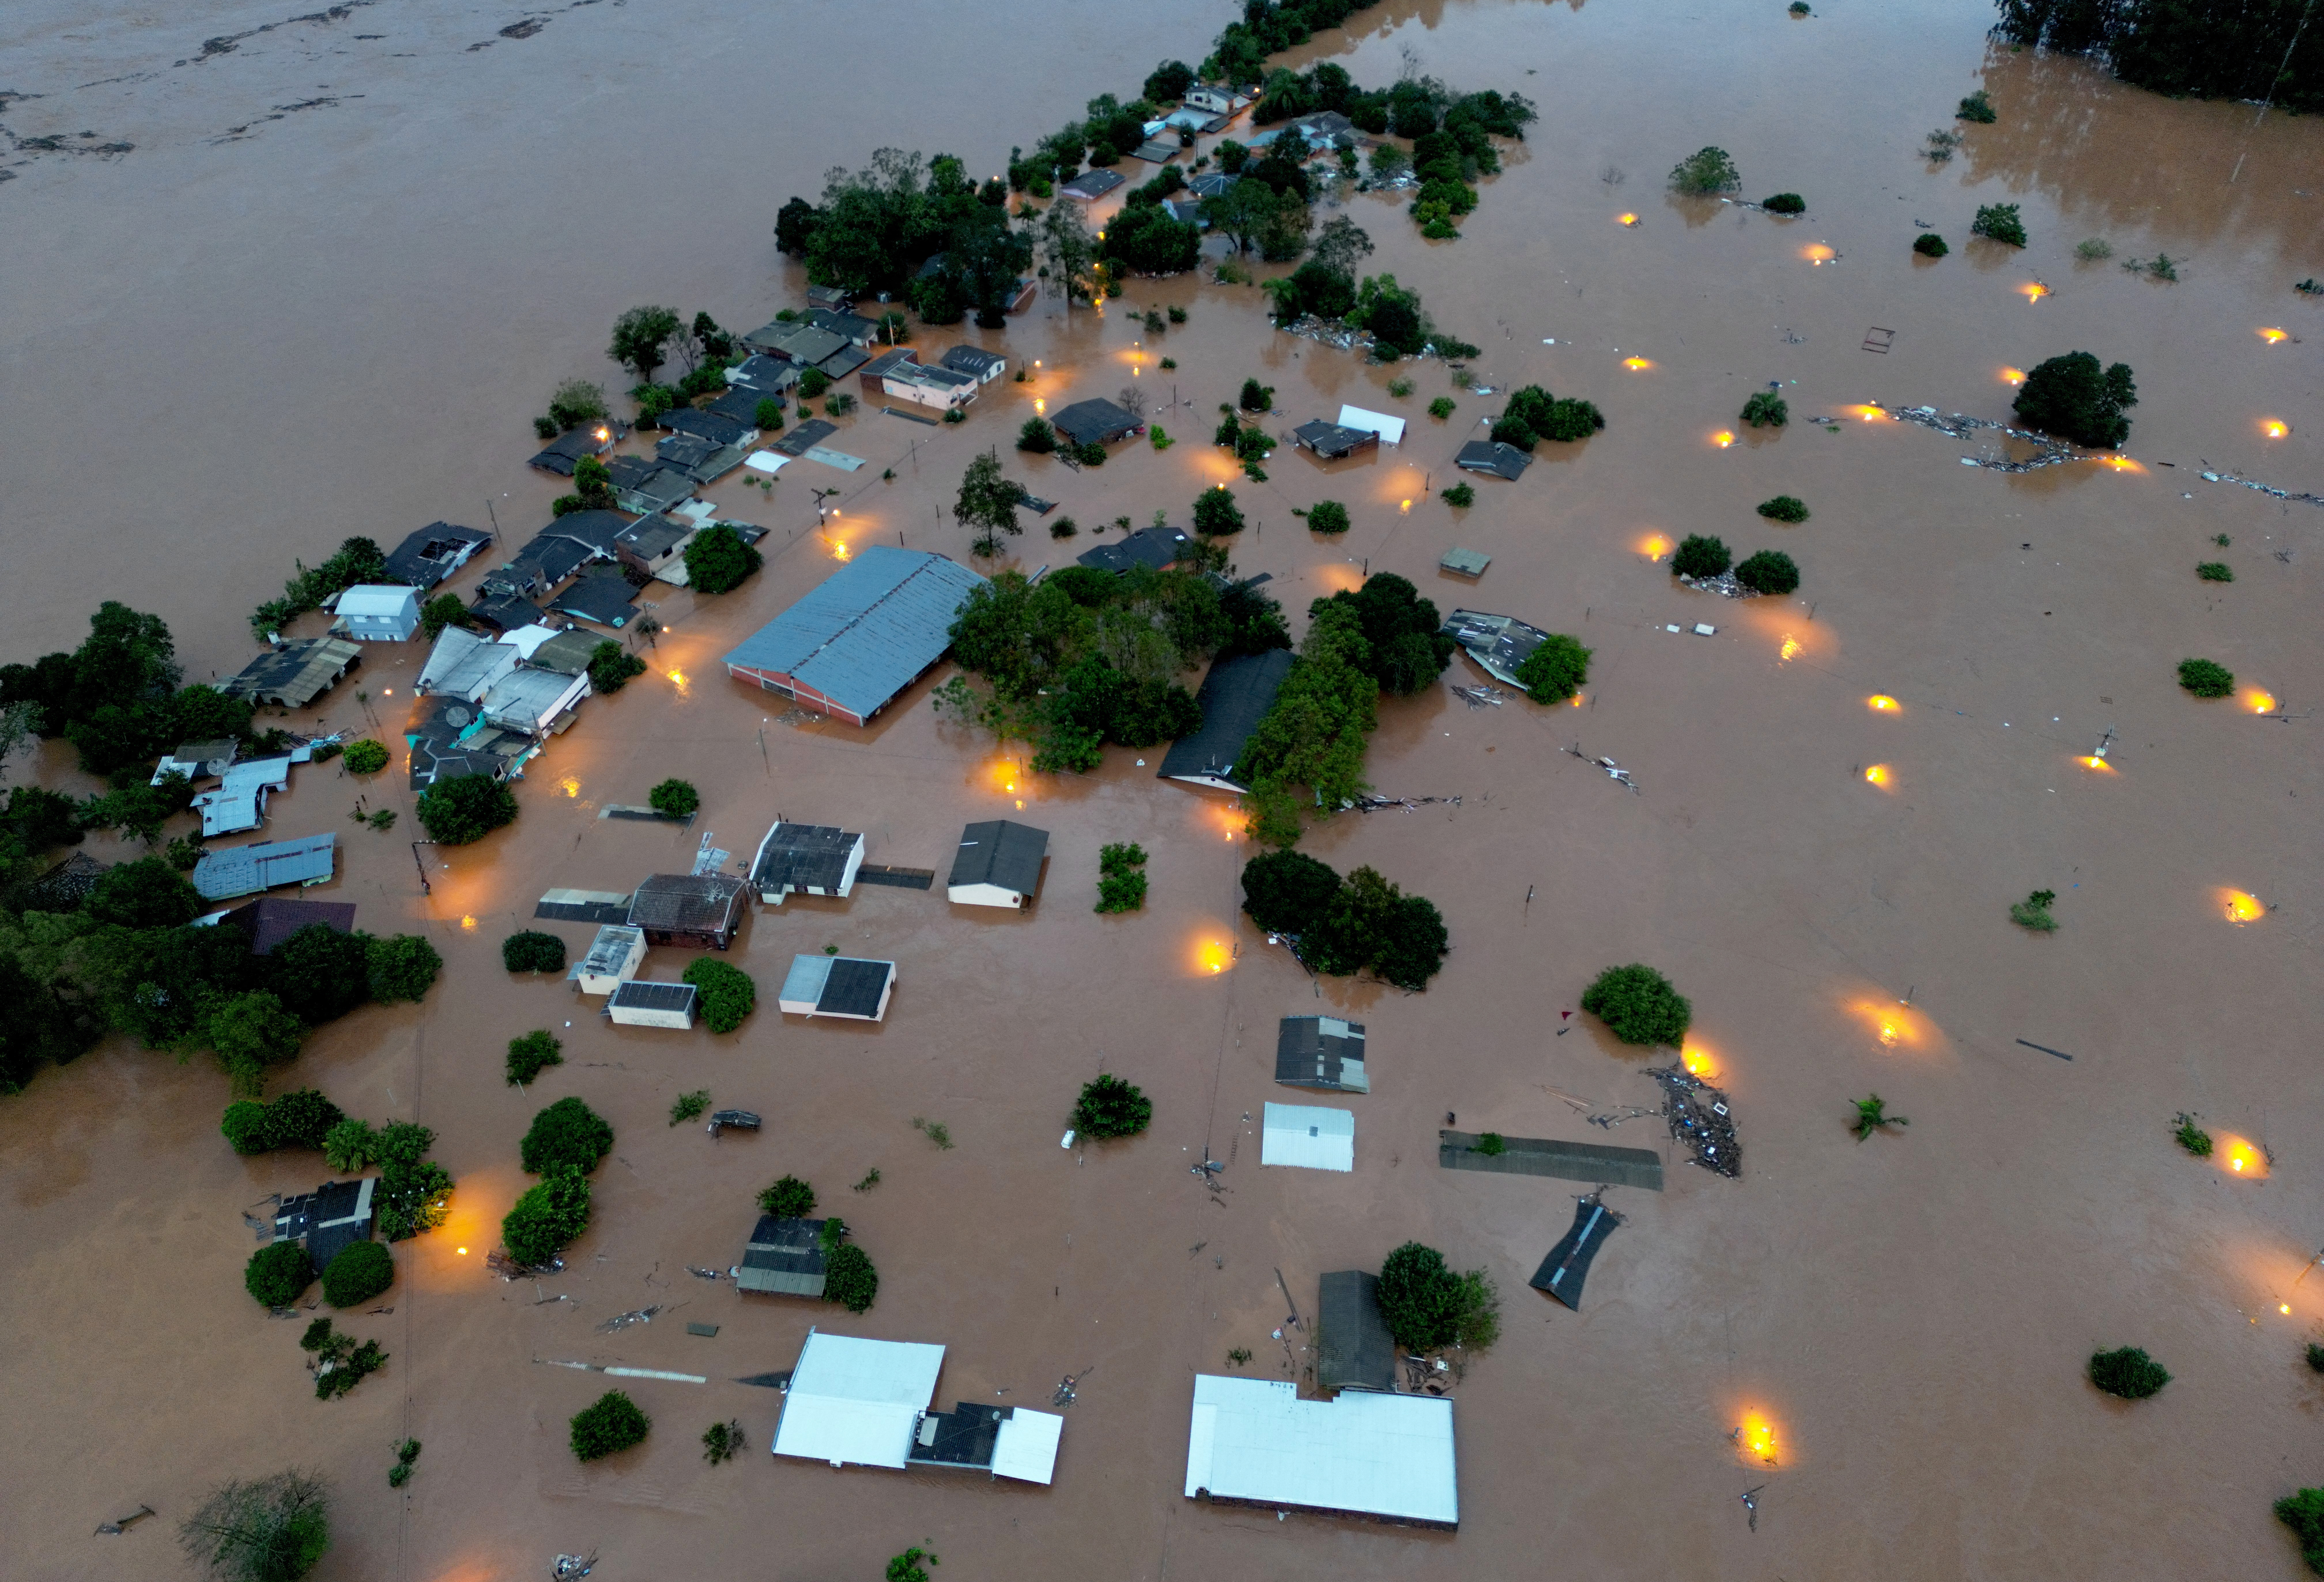 A drone view of the flooded area next to the Taquari River during heavy rains in the city of Encantado